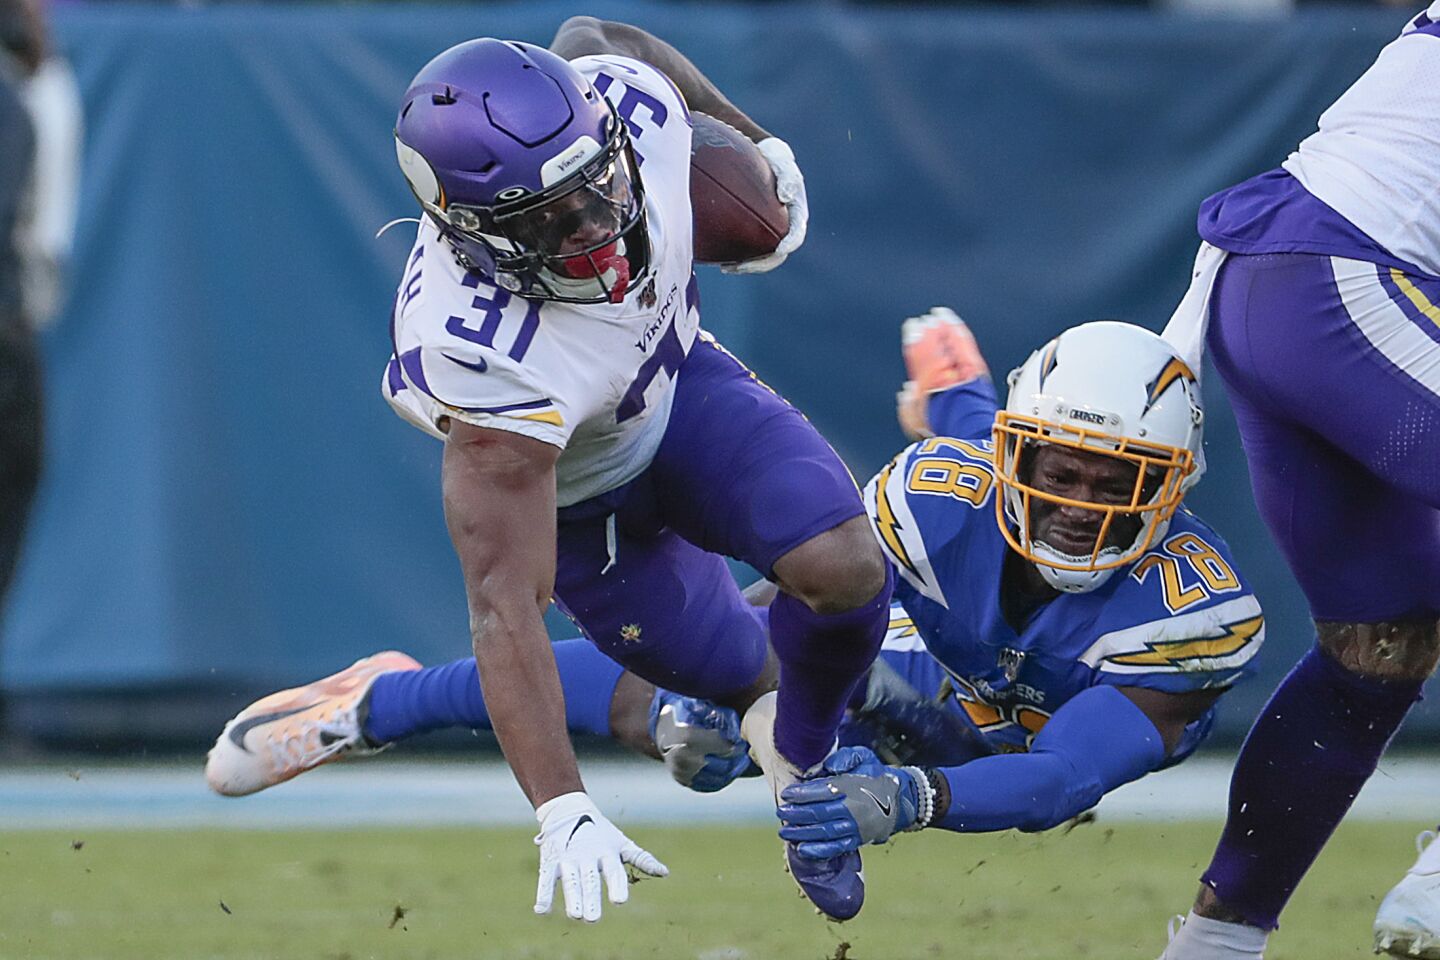 Minnesota Vikings running back Ameer Abdullah tries to break a tackle by Chargers defensive back Brandon Facyson.